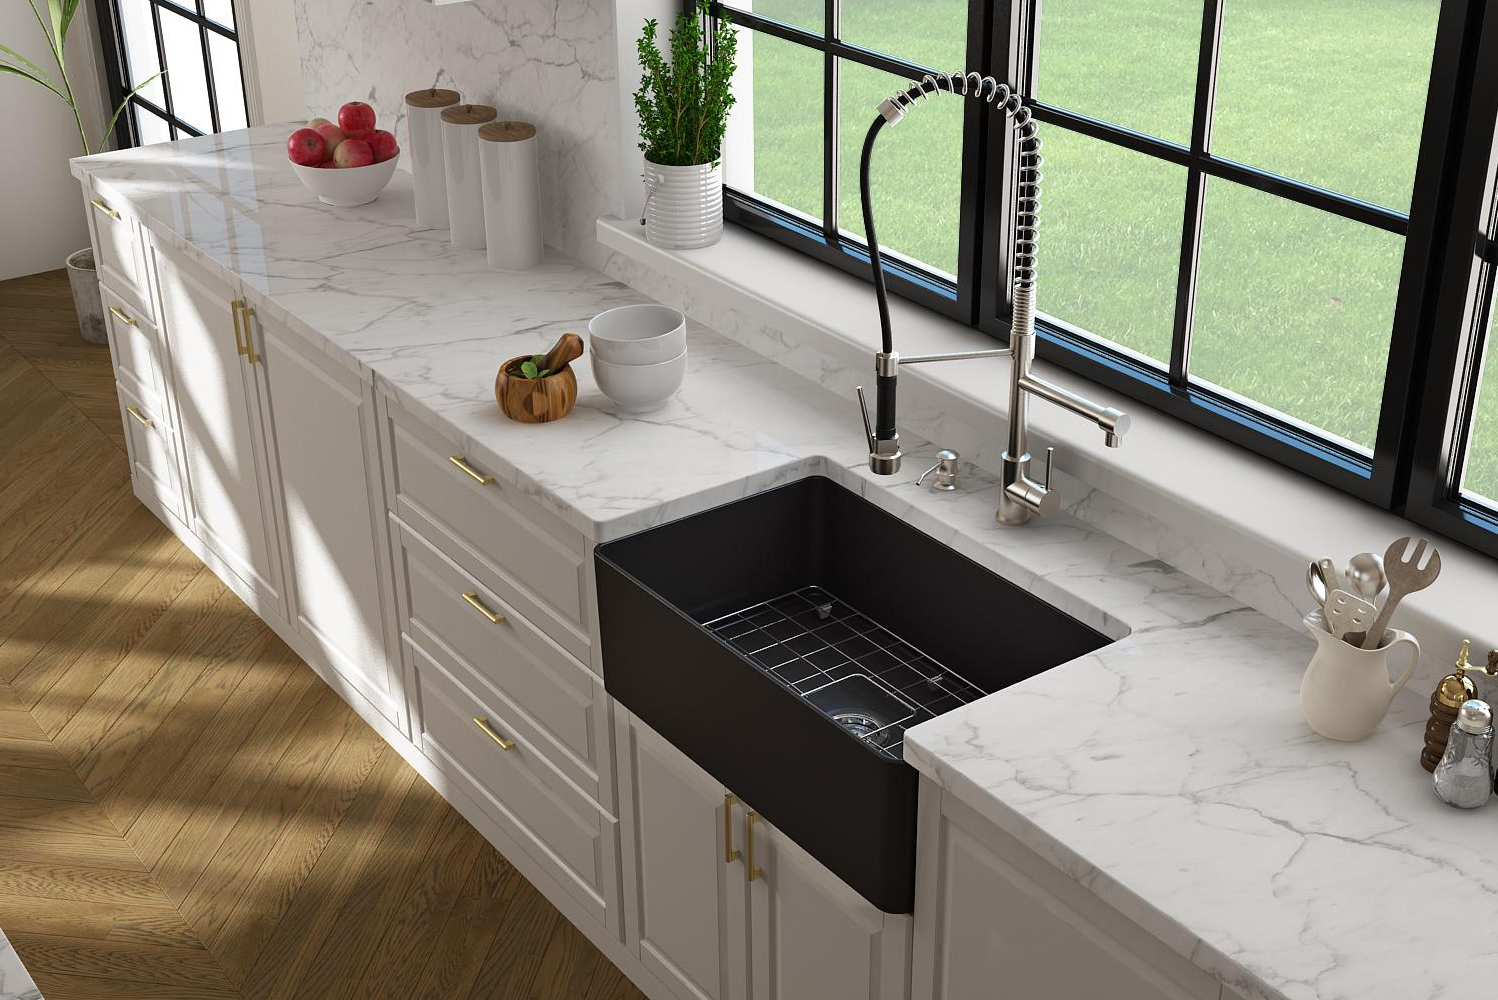 The Forte apron-front sink features a slim profile to allow its wall thickness to be cut nearly in half versus traditional fi